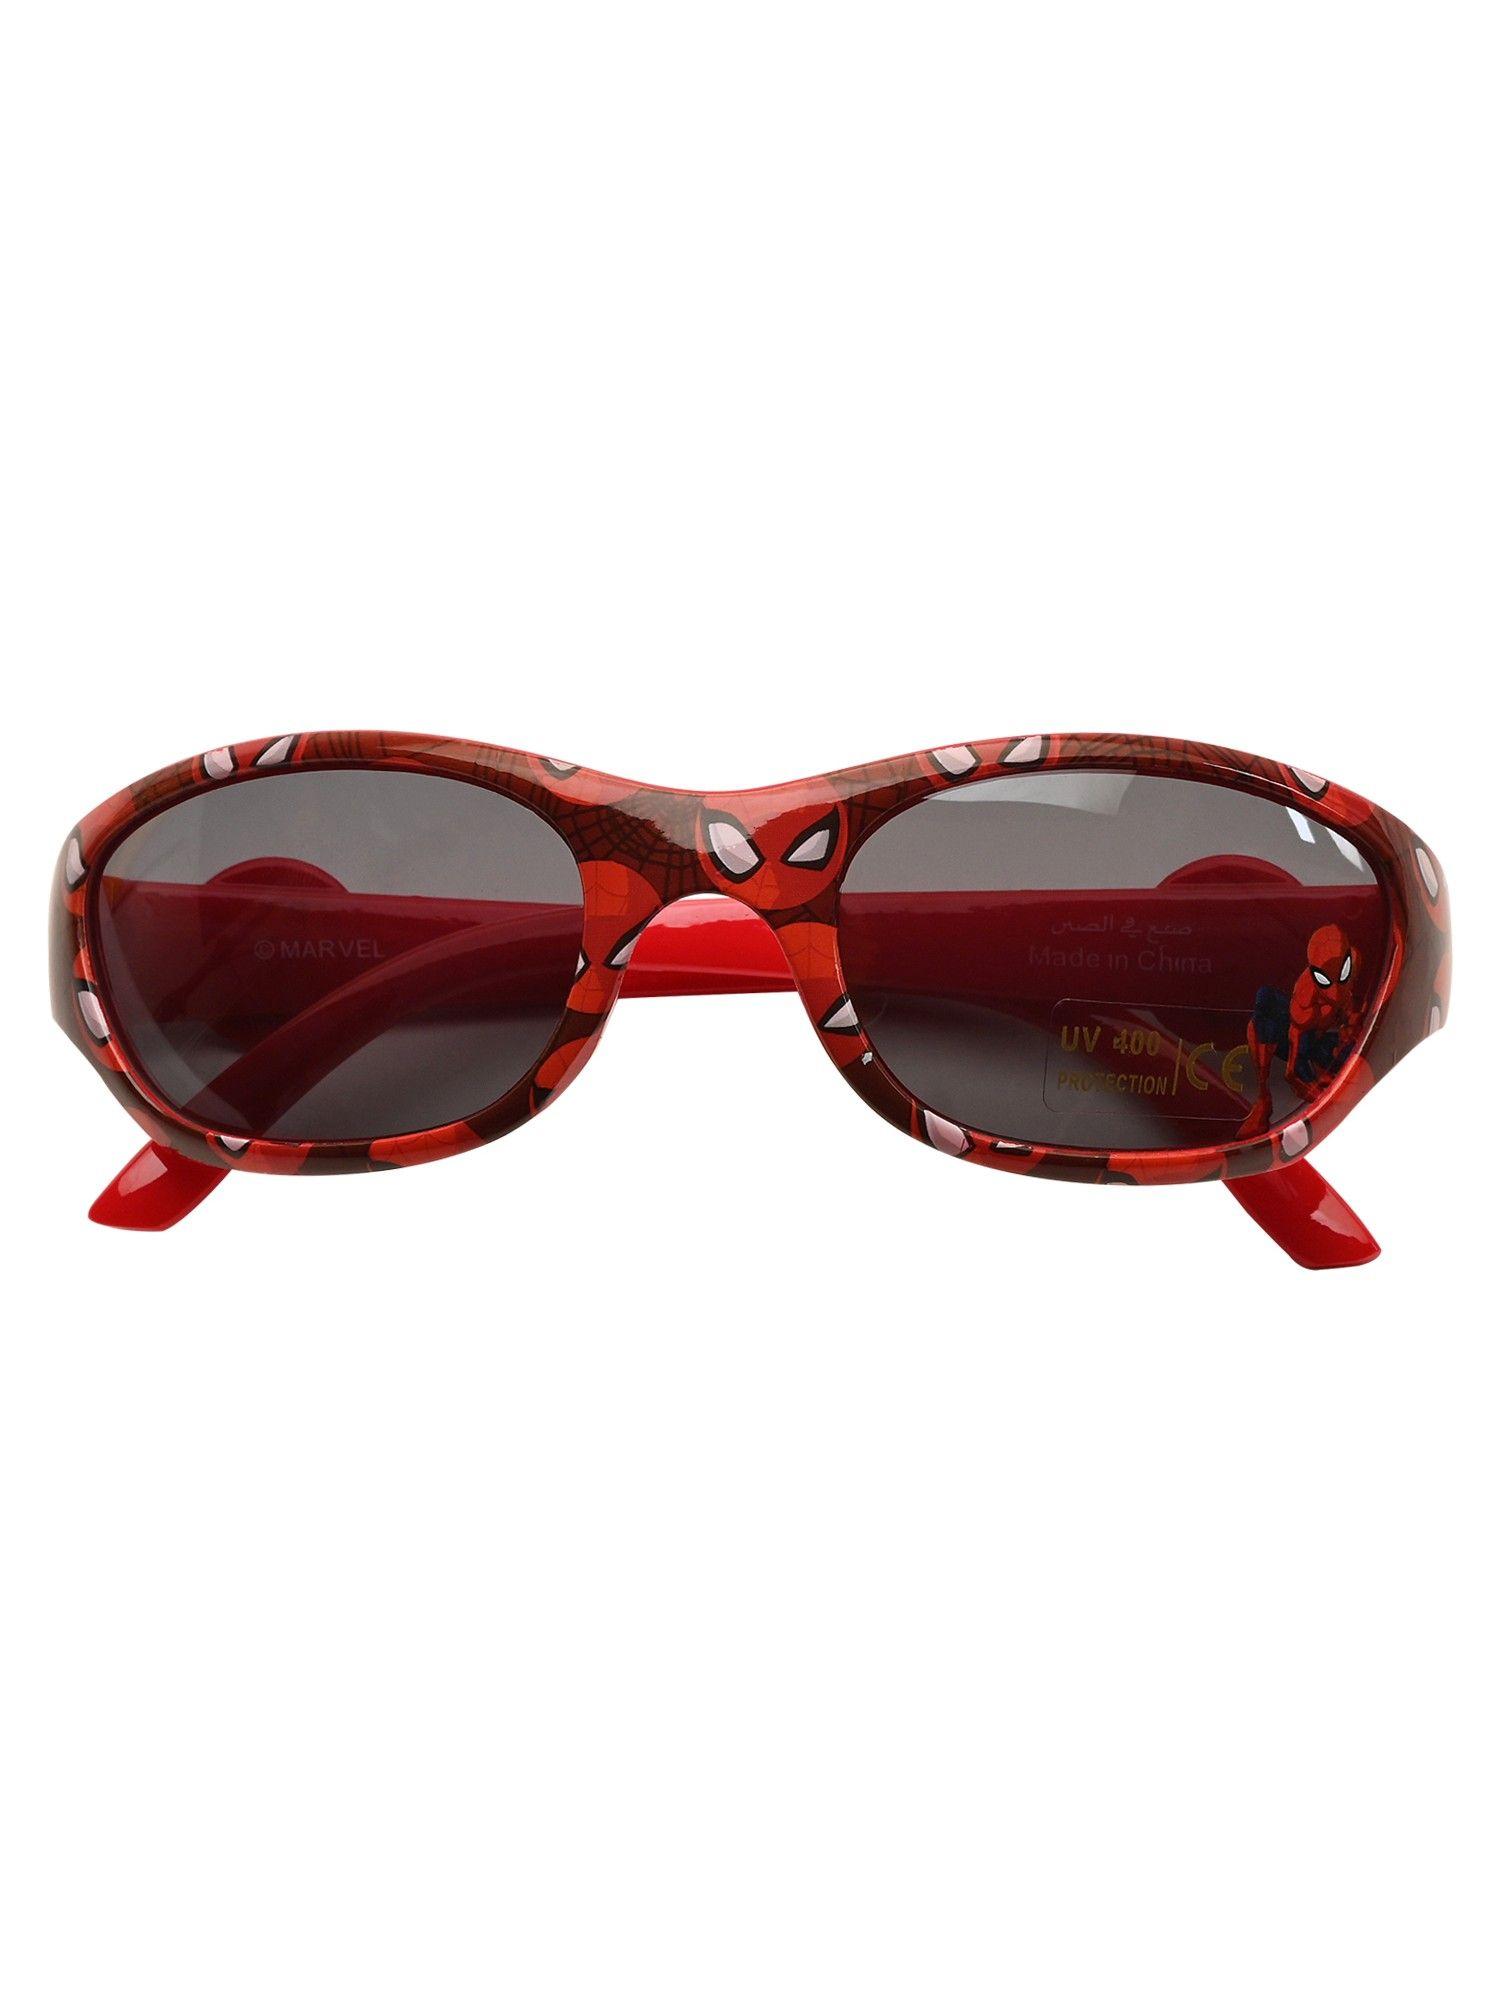 Kids Spiderman Sunglasses With Pouch